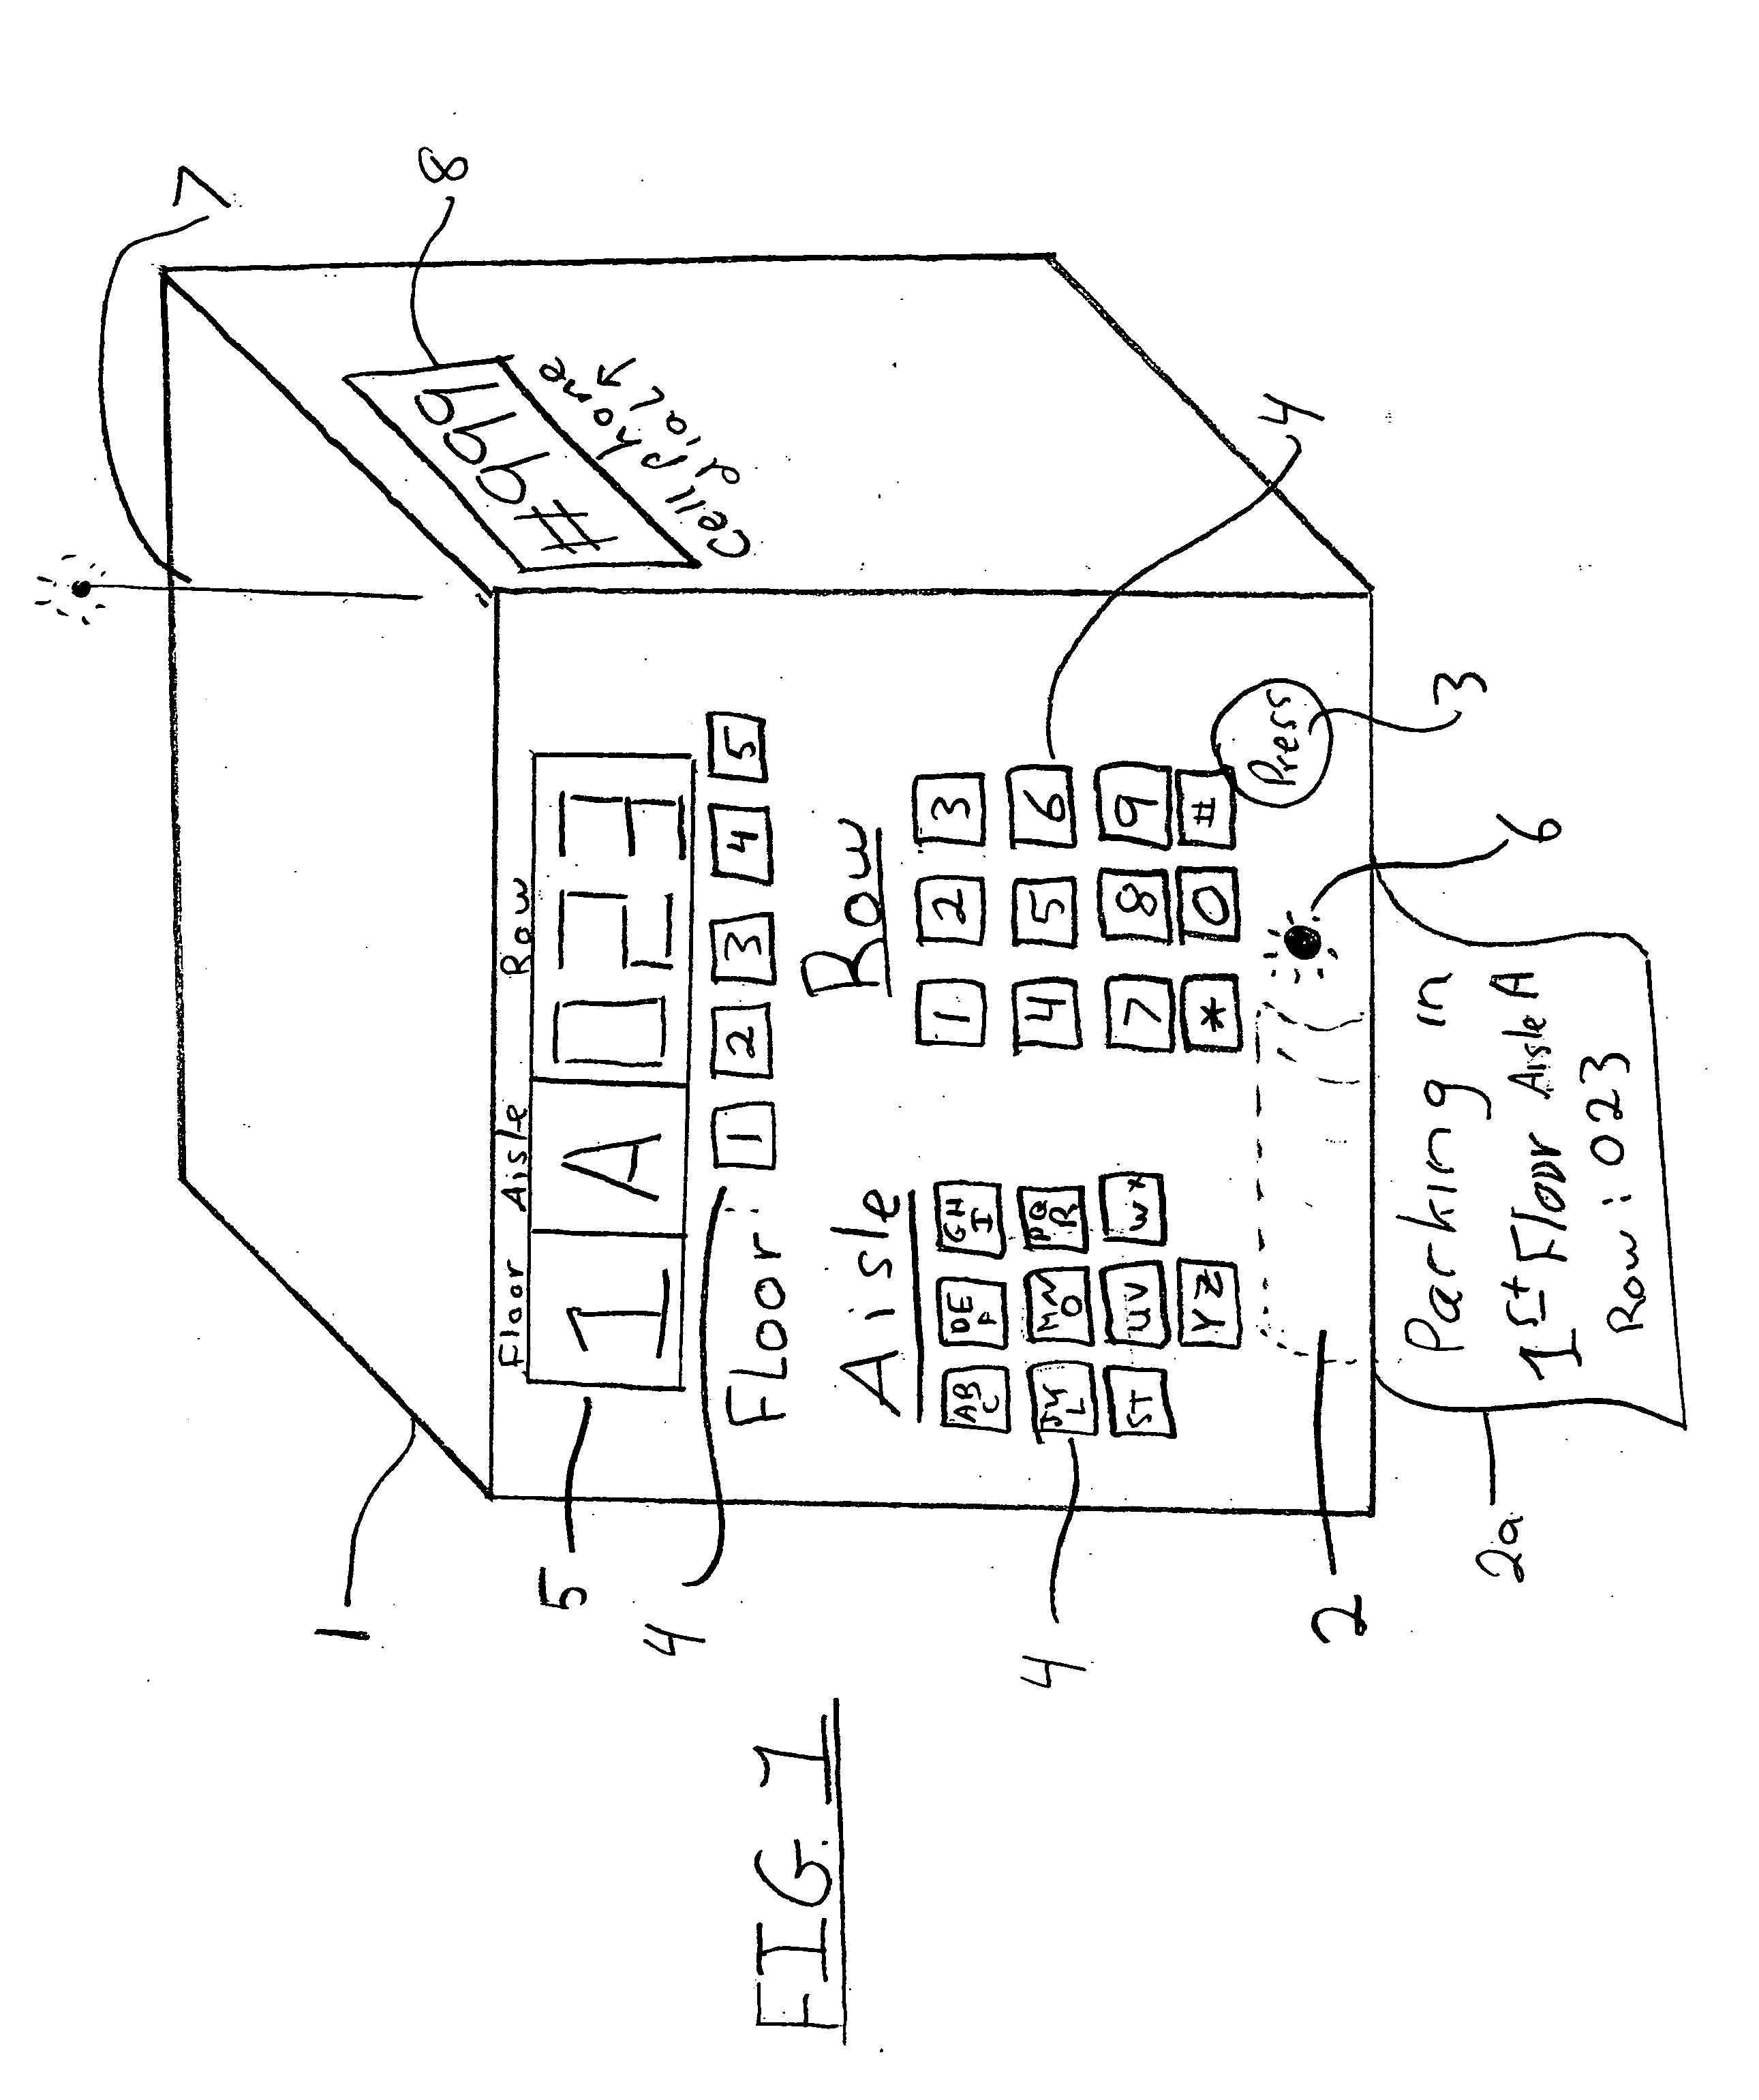 Parked vehicle re-location and advertising/promotion/coupon distribution device